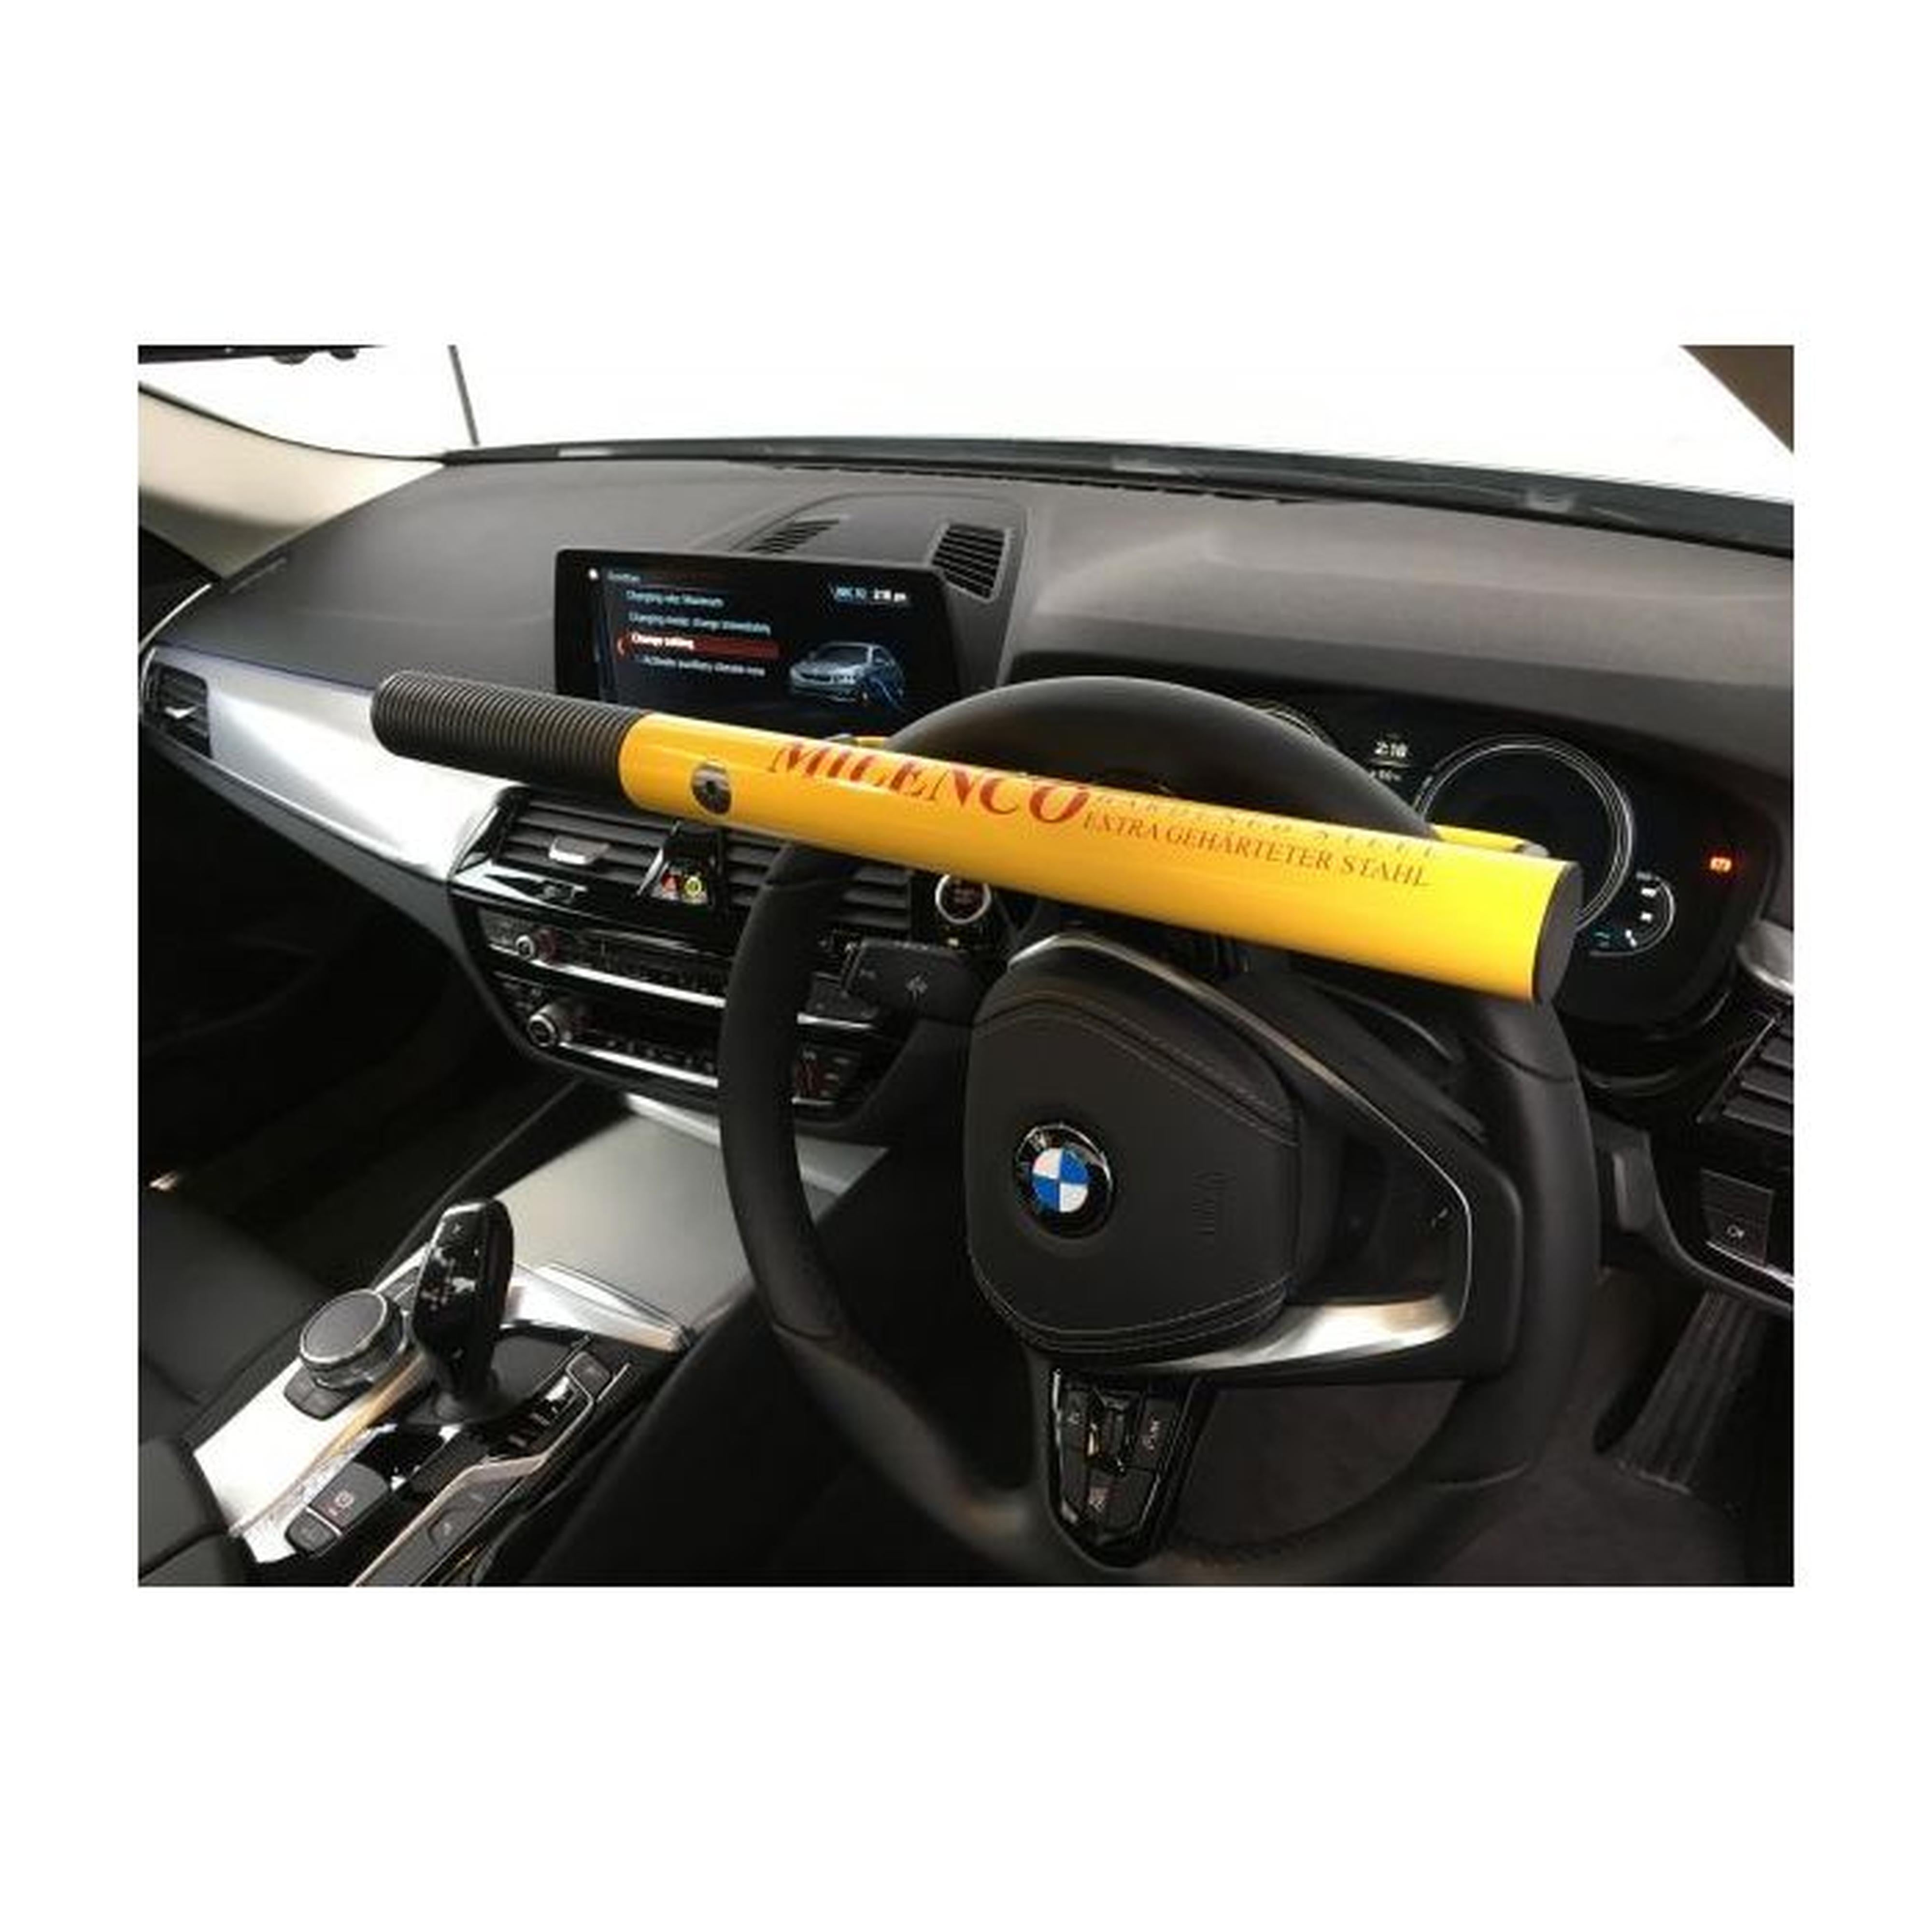 Milenco High Security Steering Wheel Lock Soft Pads from Jacksons